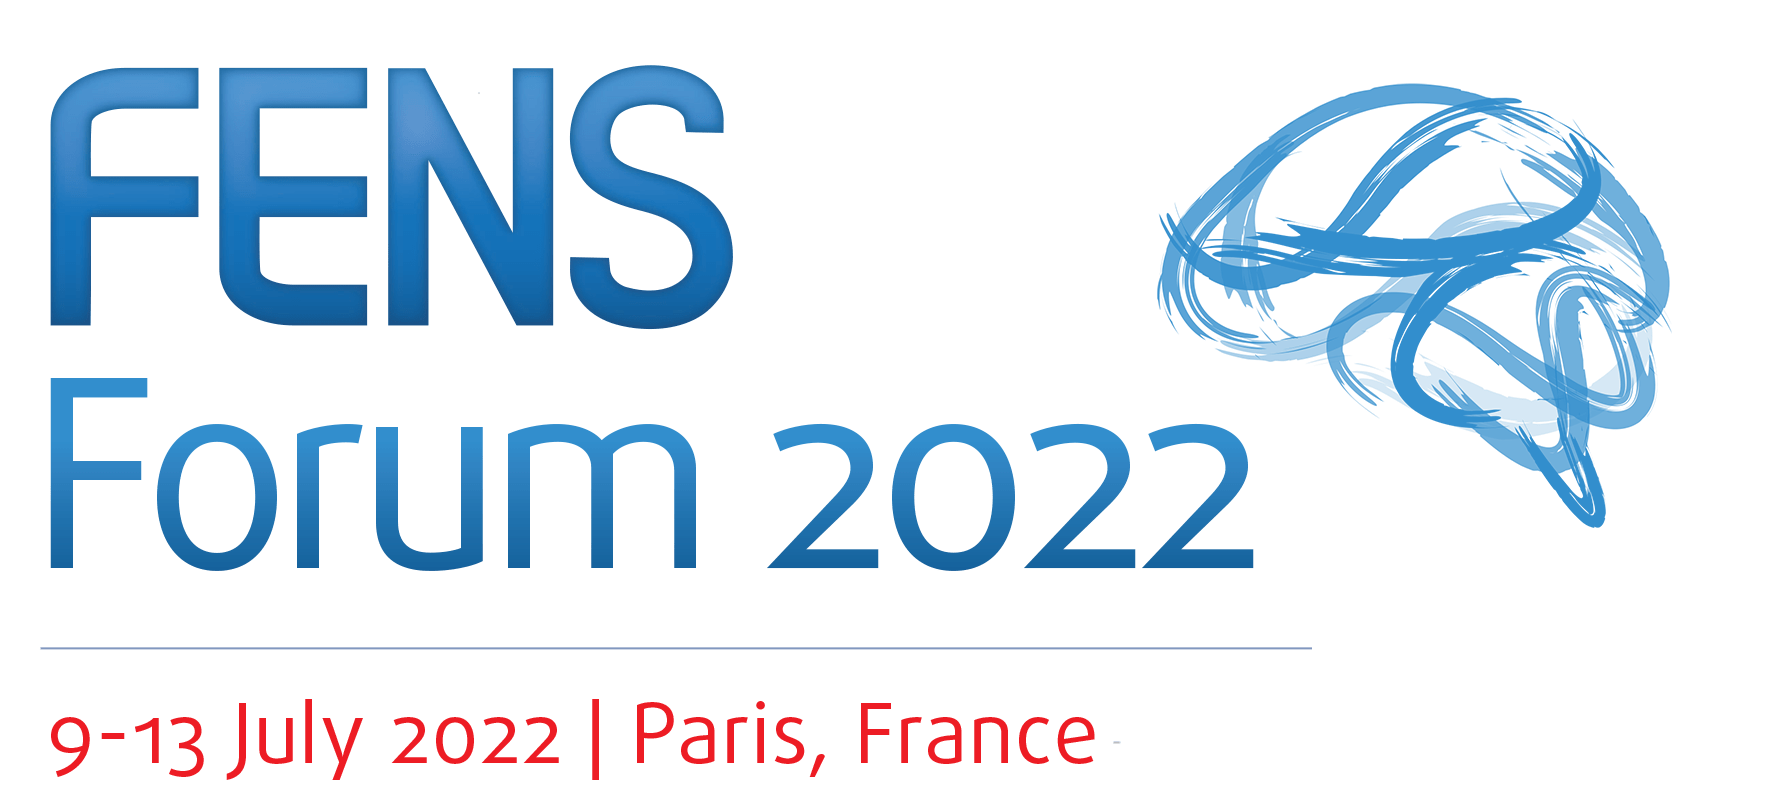 Tips and Tools for Social Media - FENS 2022 - International Neuroscience Conference